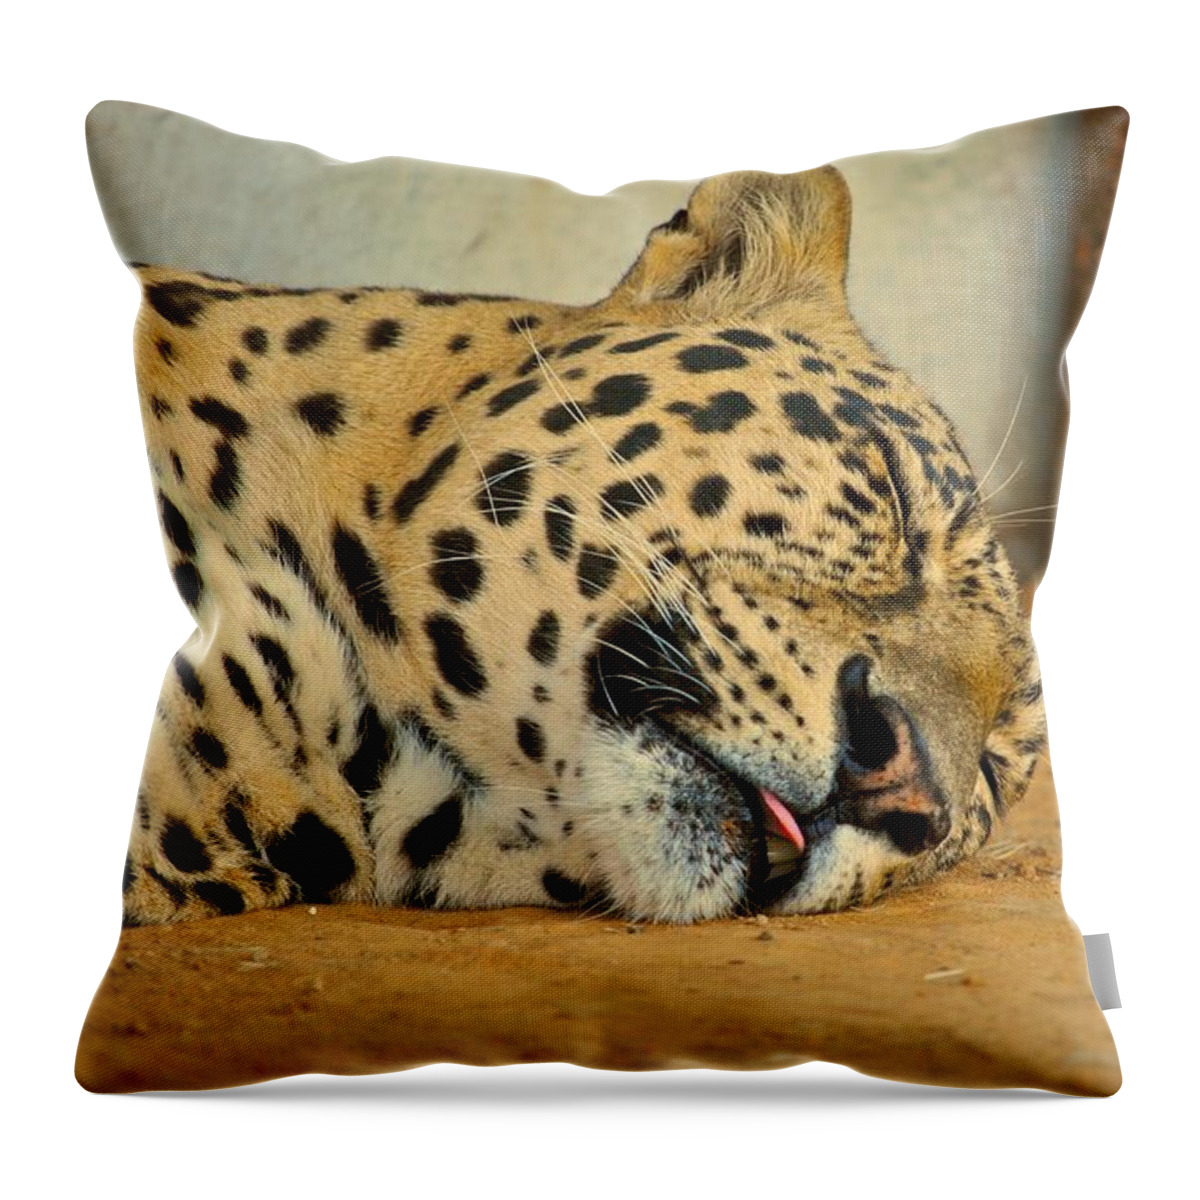 Leopards Throw Pillow featuring the photograph Nap Time by Donna Shahan